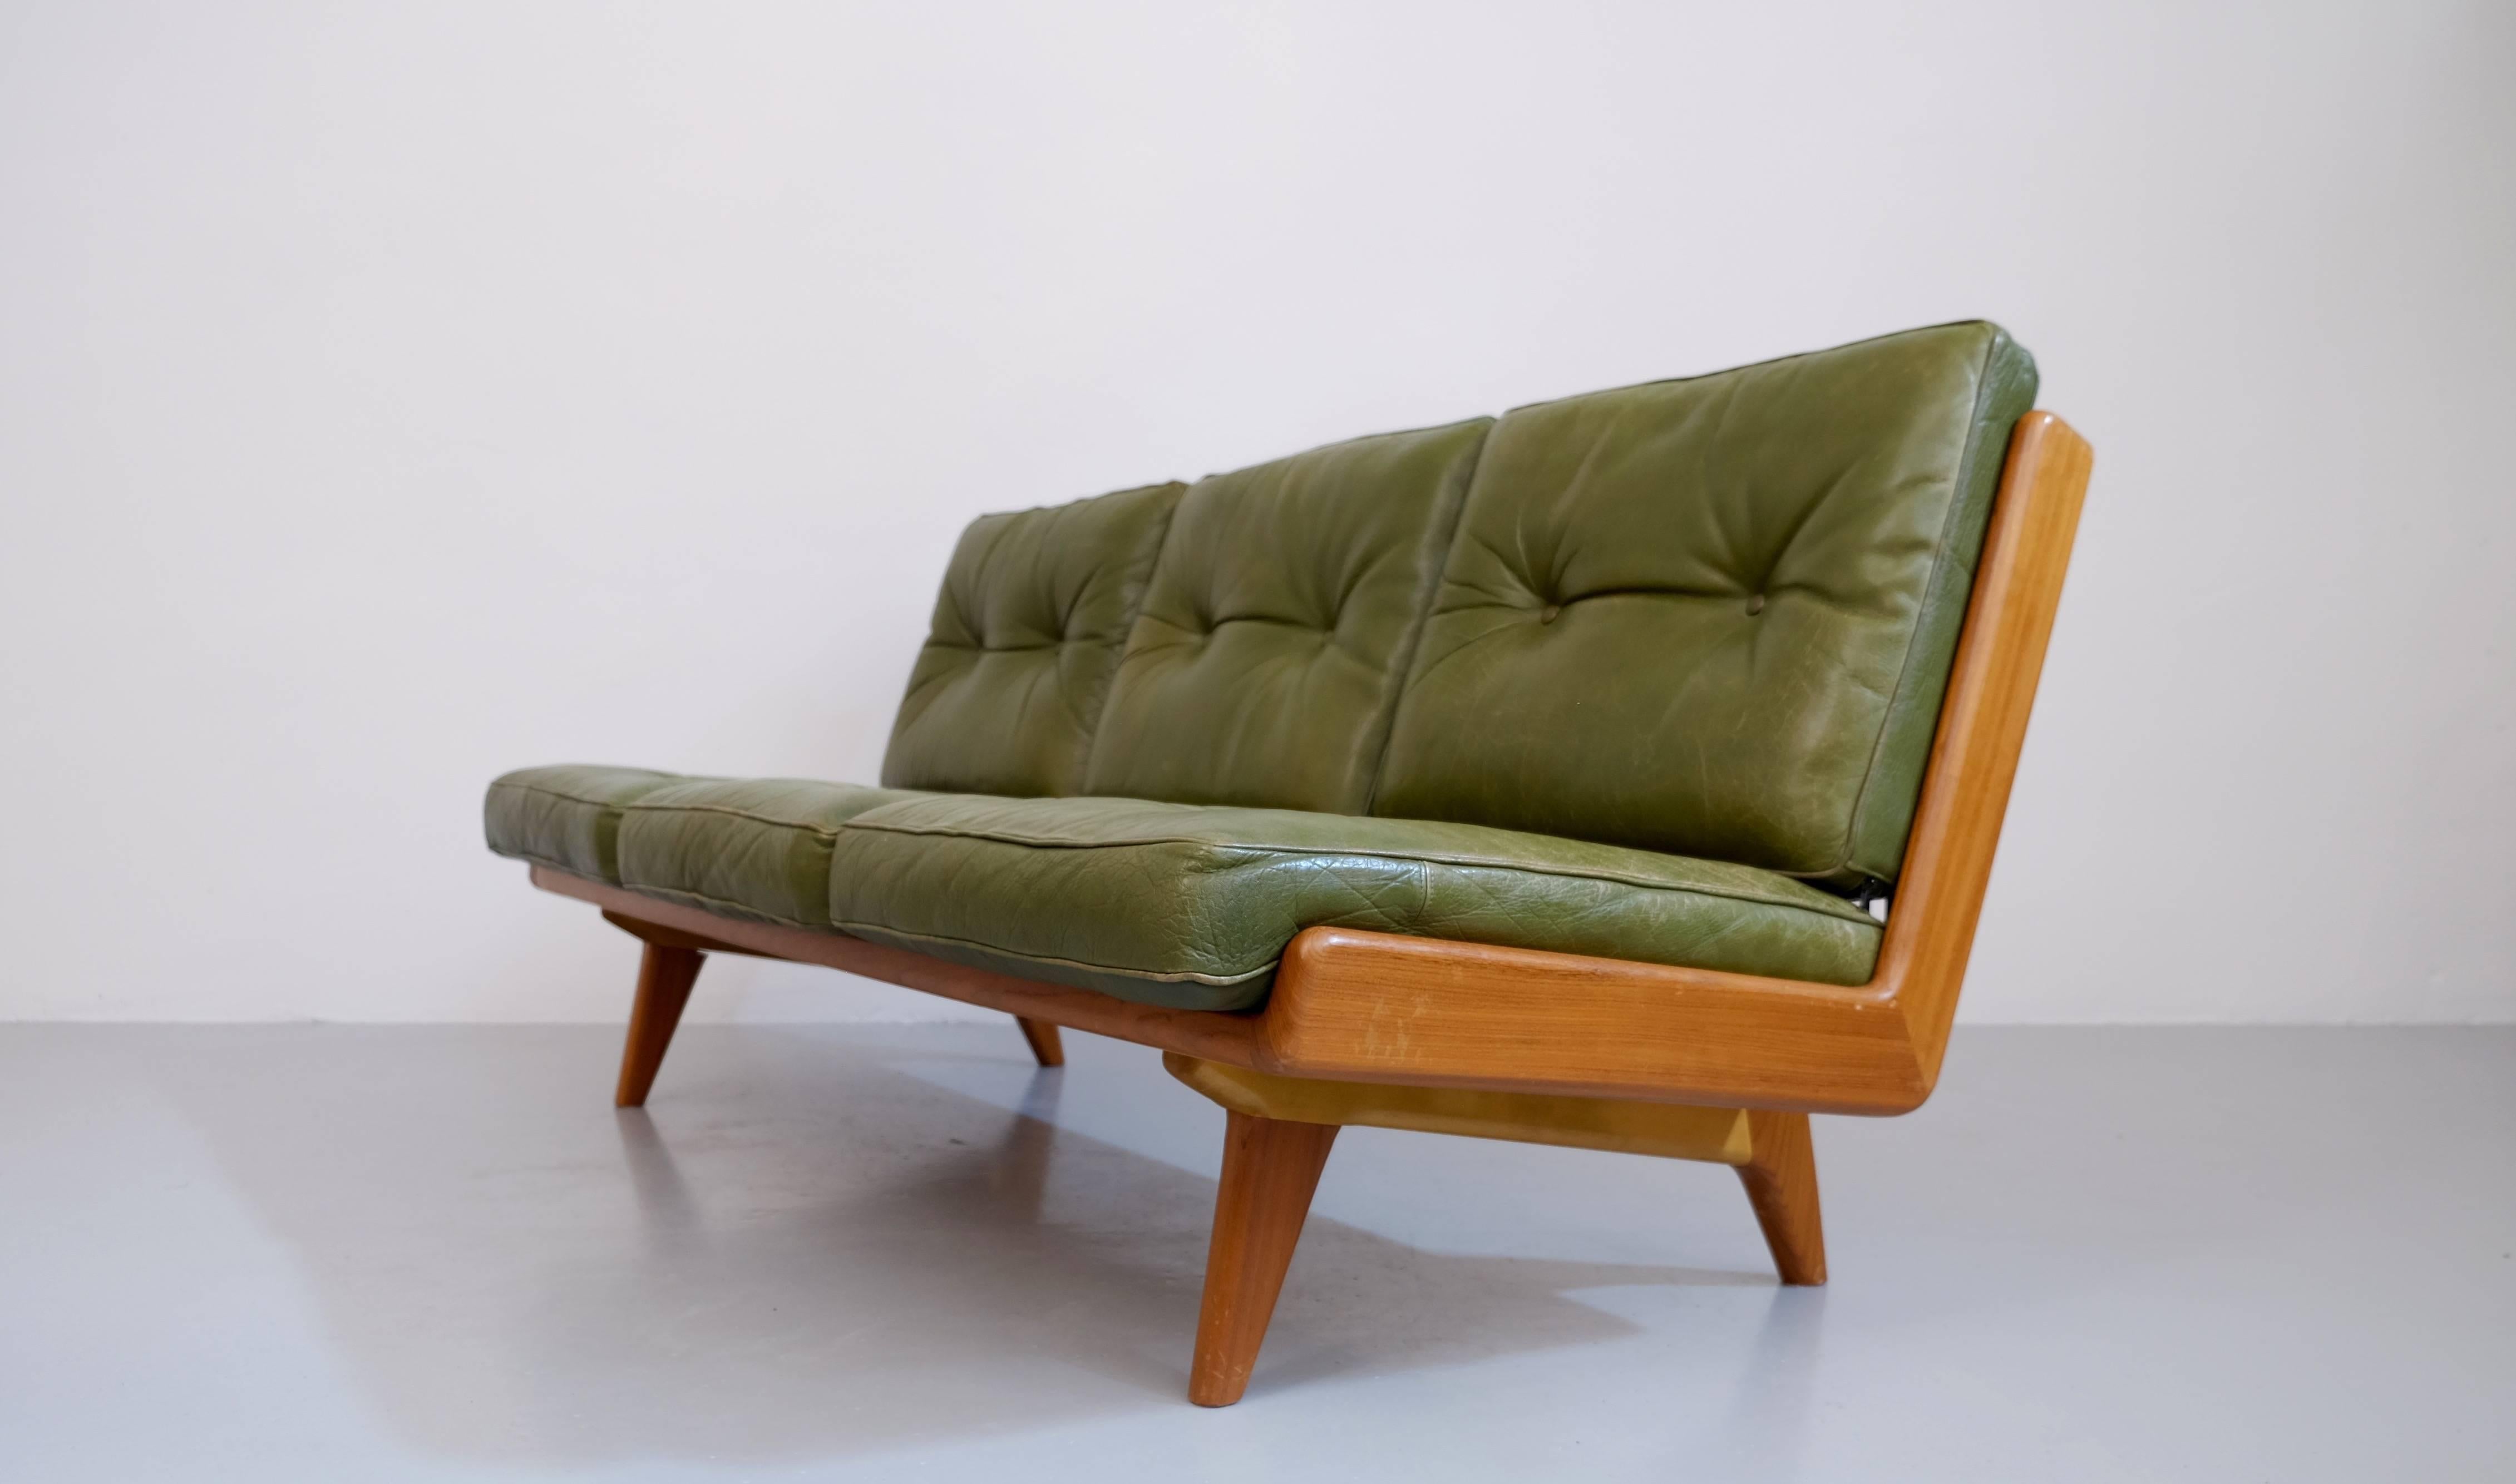 Excellent original condition. 
Original green leather cushions, braided natural leather in the back.